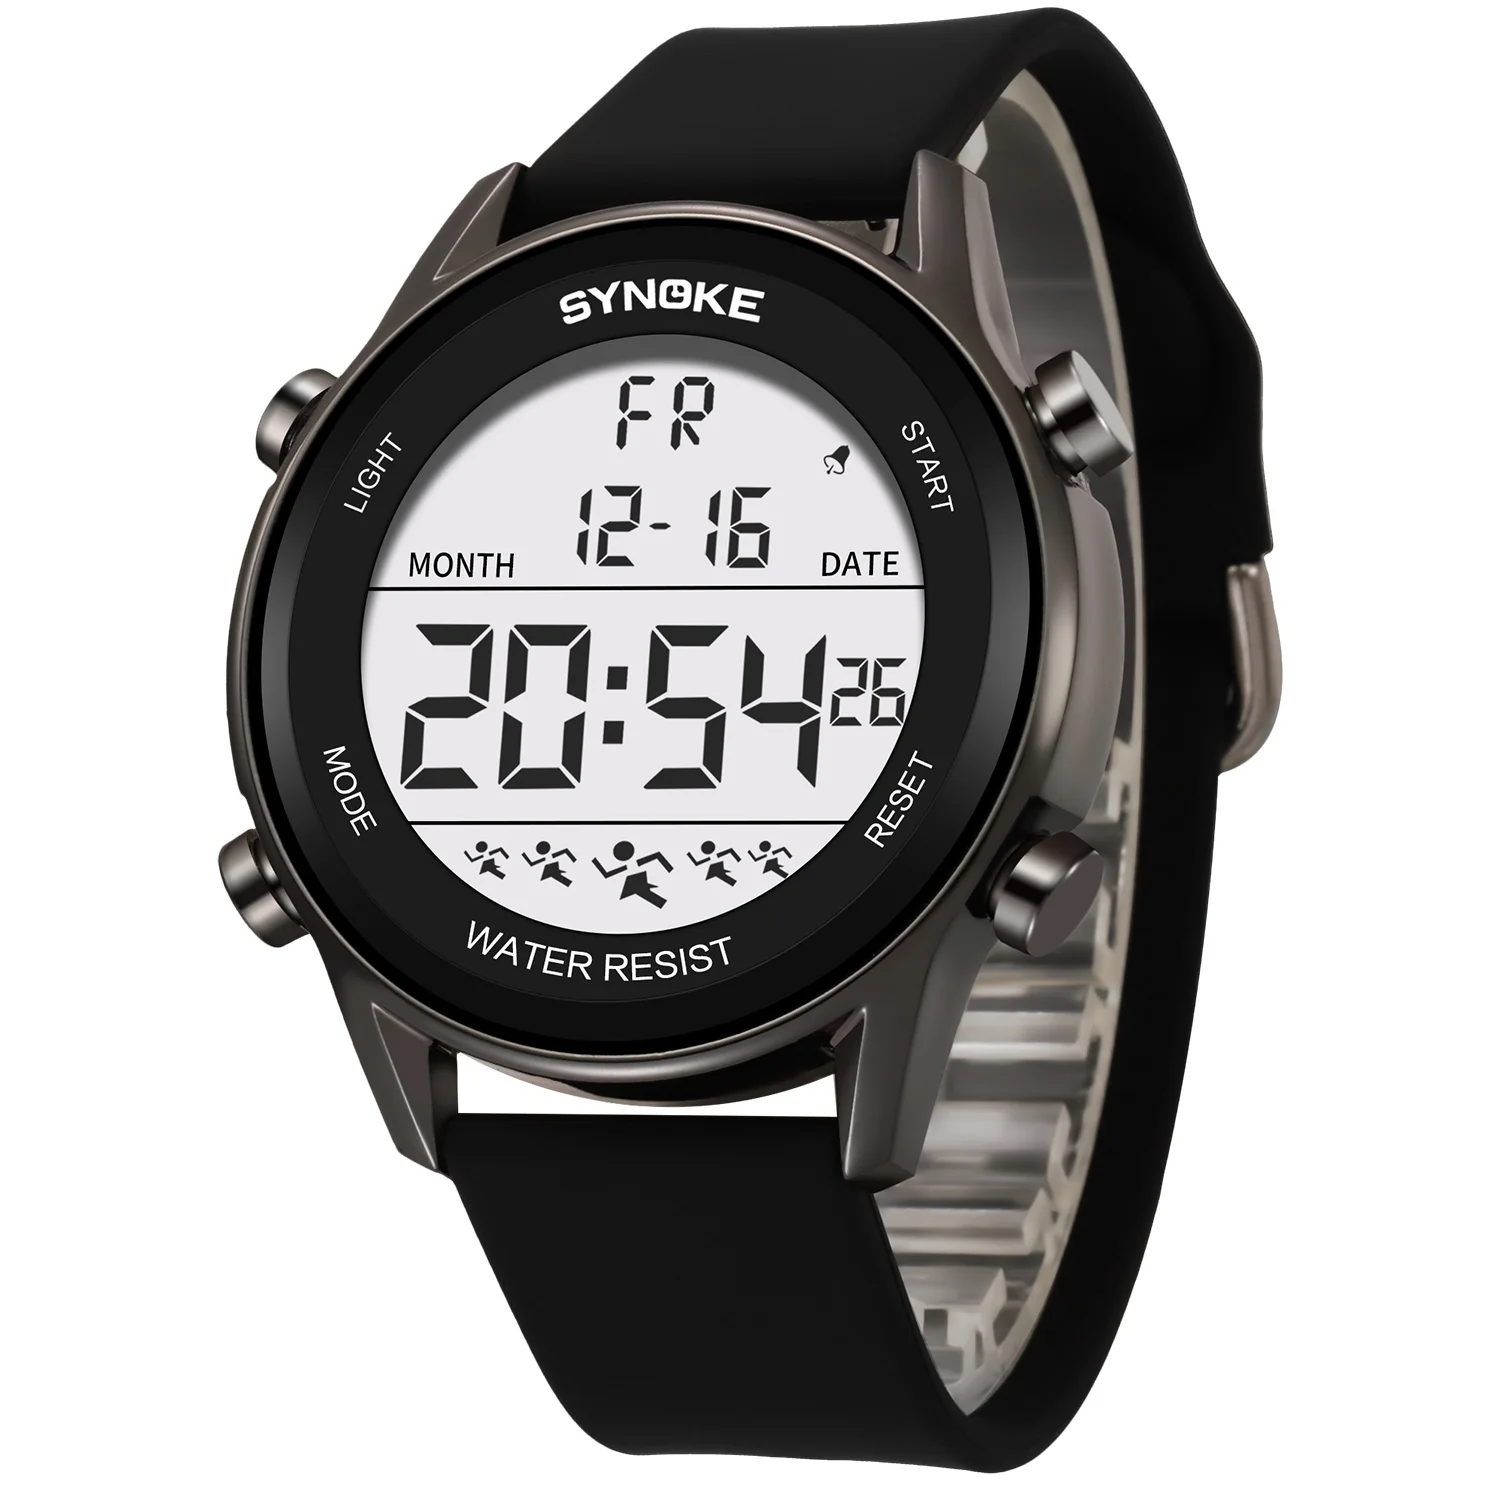 

Waterproof Watches Man Digital Watch SYNOKE Brand Big Numbers Easy To Read Ultra-thin Men Military Watch relogio masculino